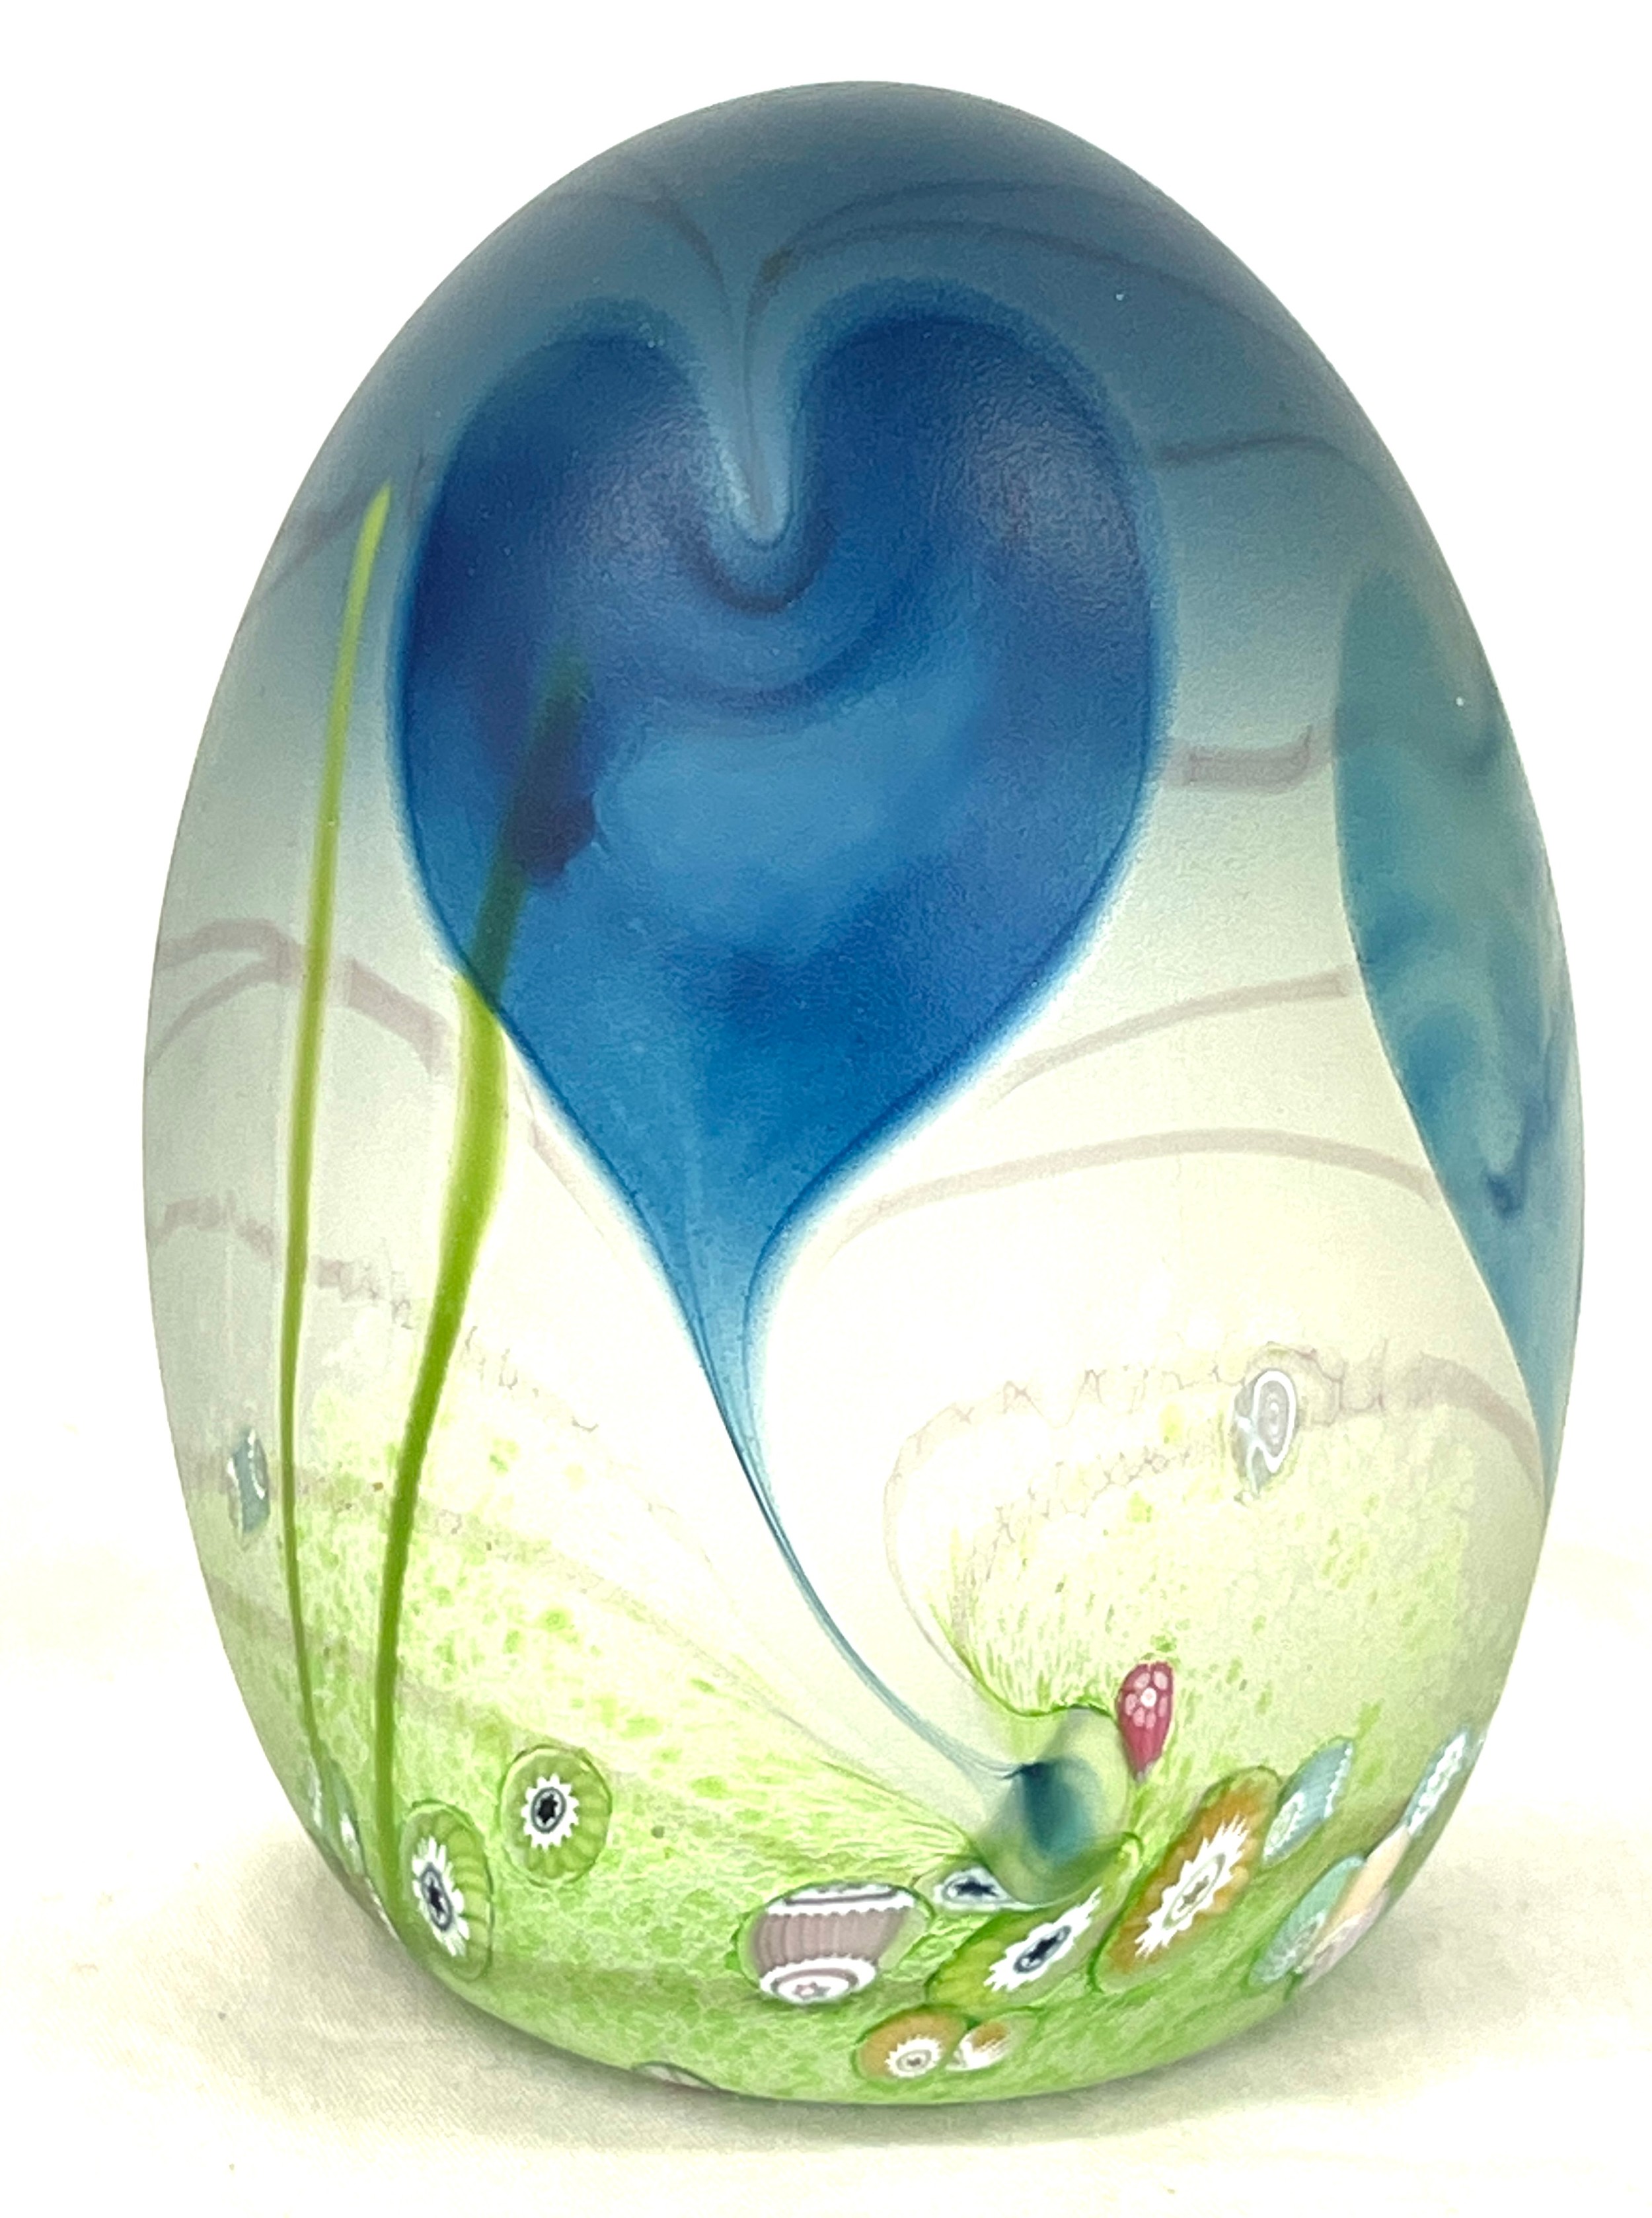 Signed satin glass Caithness Scotland Juliet paperweight, limited edition 12/500 - Image 6 of 6